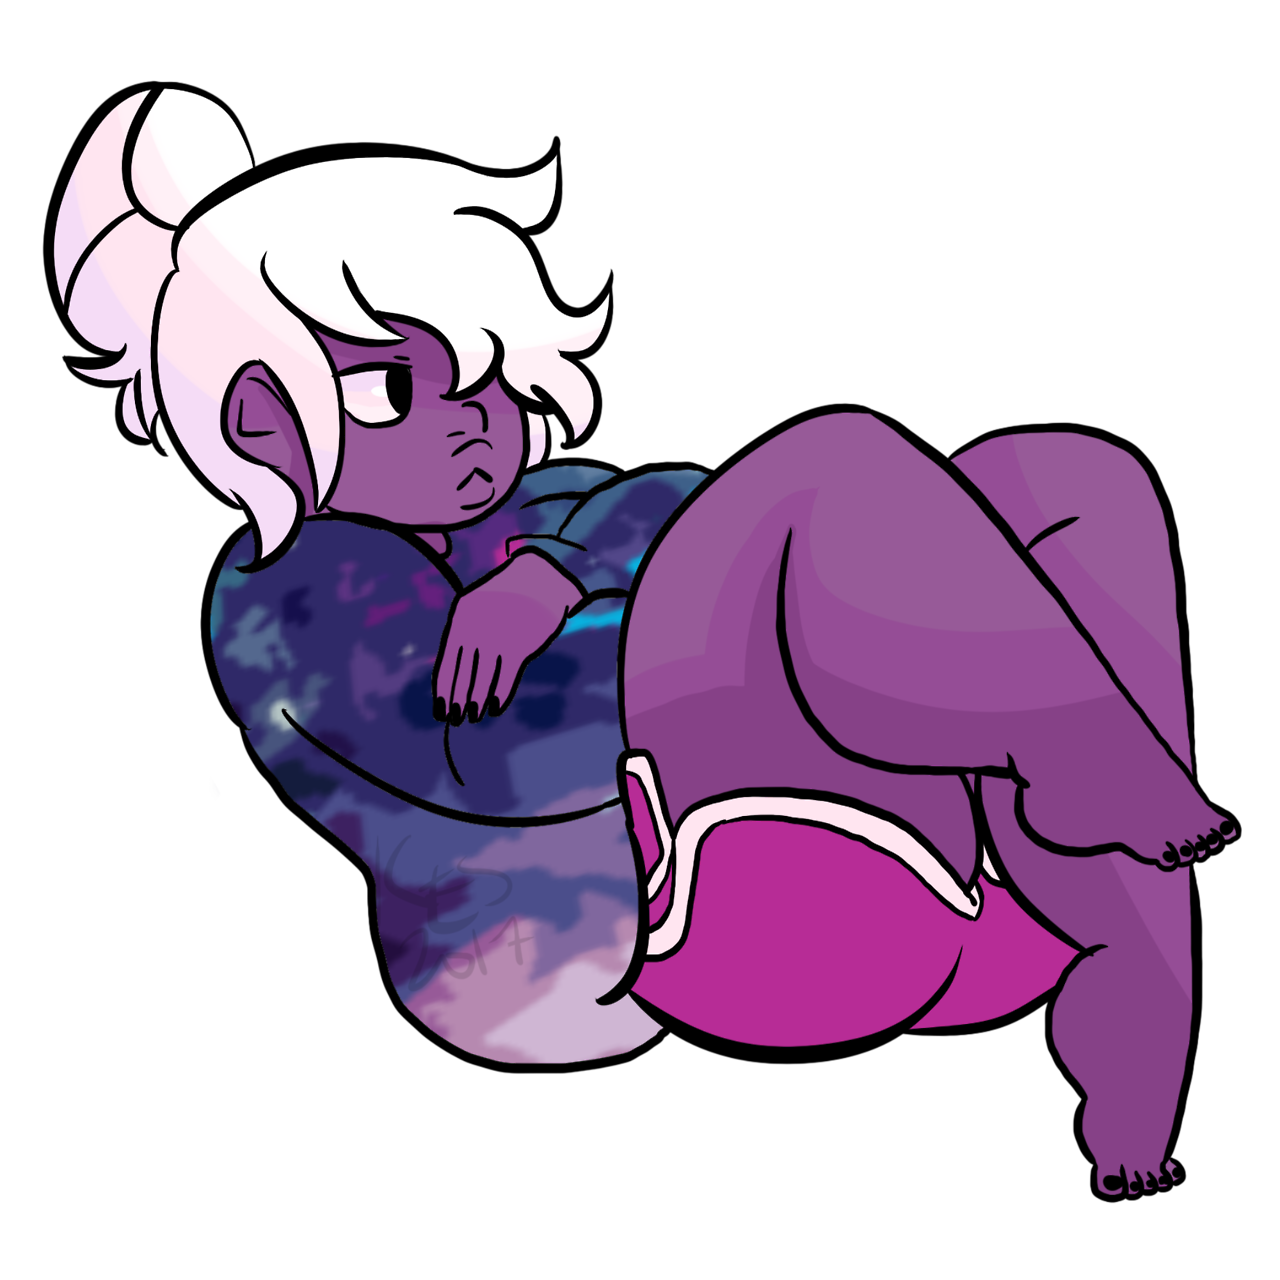 Getting back out of my artblock with some comfy Amethyst doodles… I love her she’s so round.🖤🖤🖤